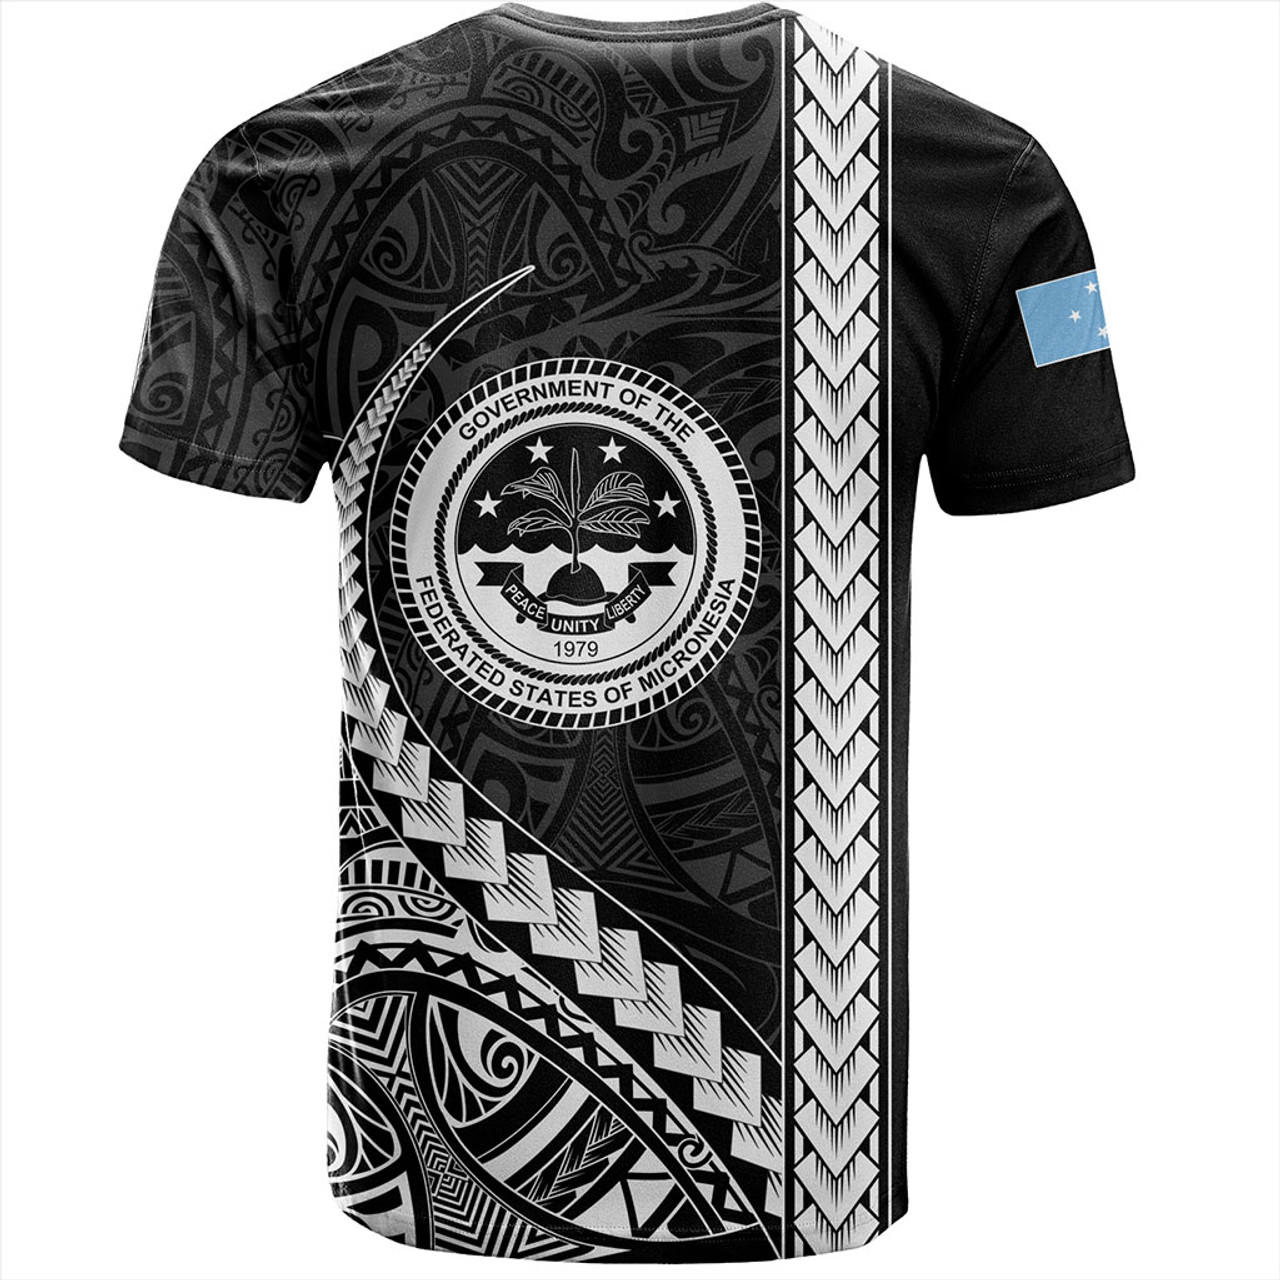 Federated States Of Micronesia T-Shirt Tribal Micronesian Coat Of Arms